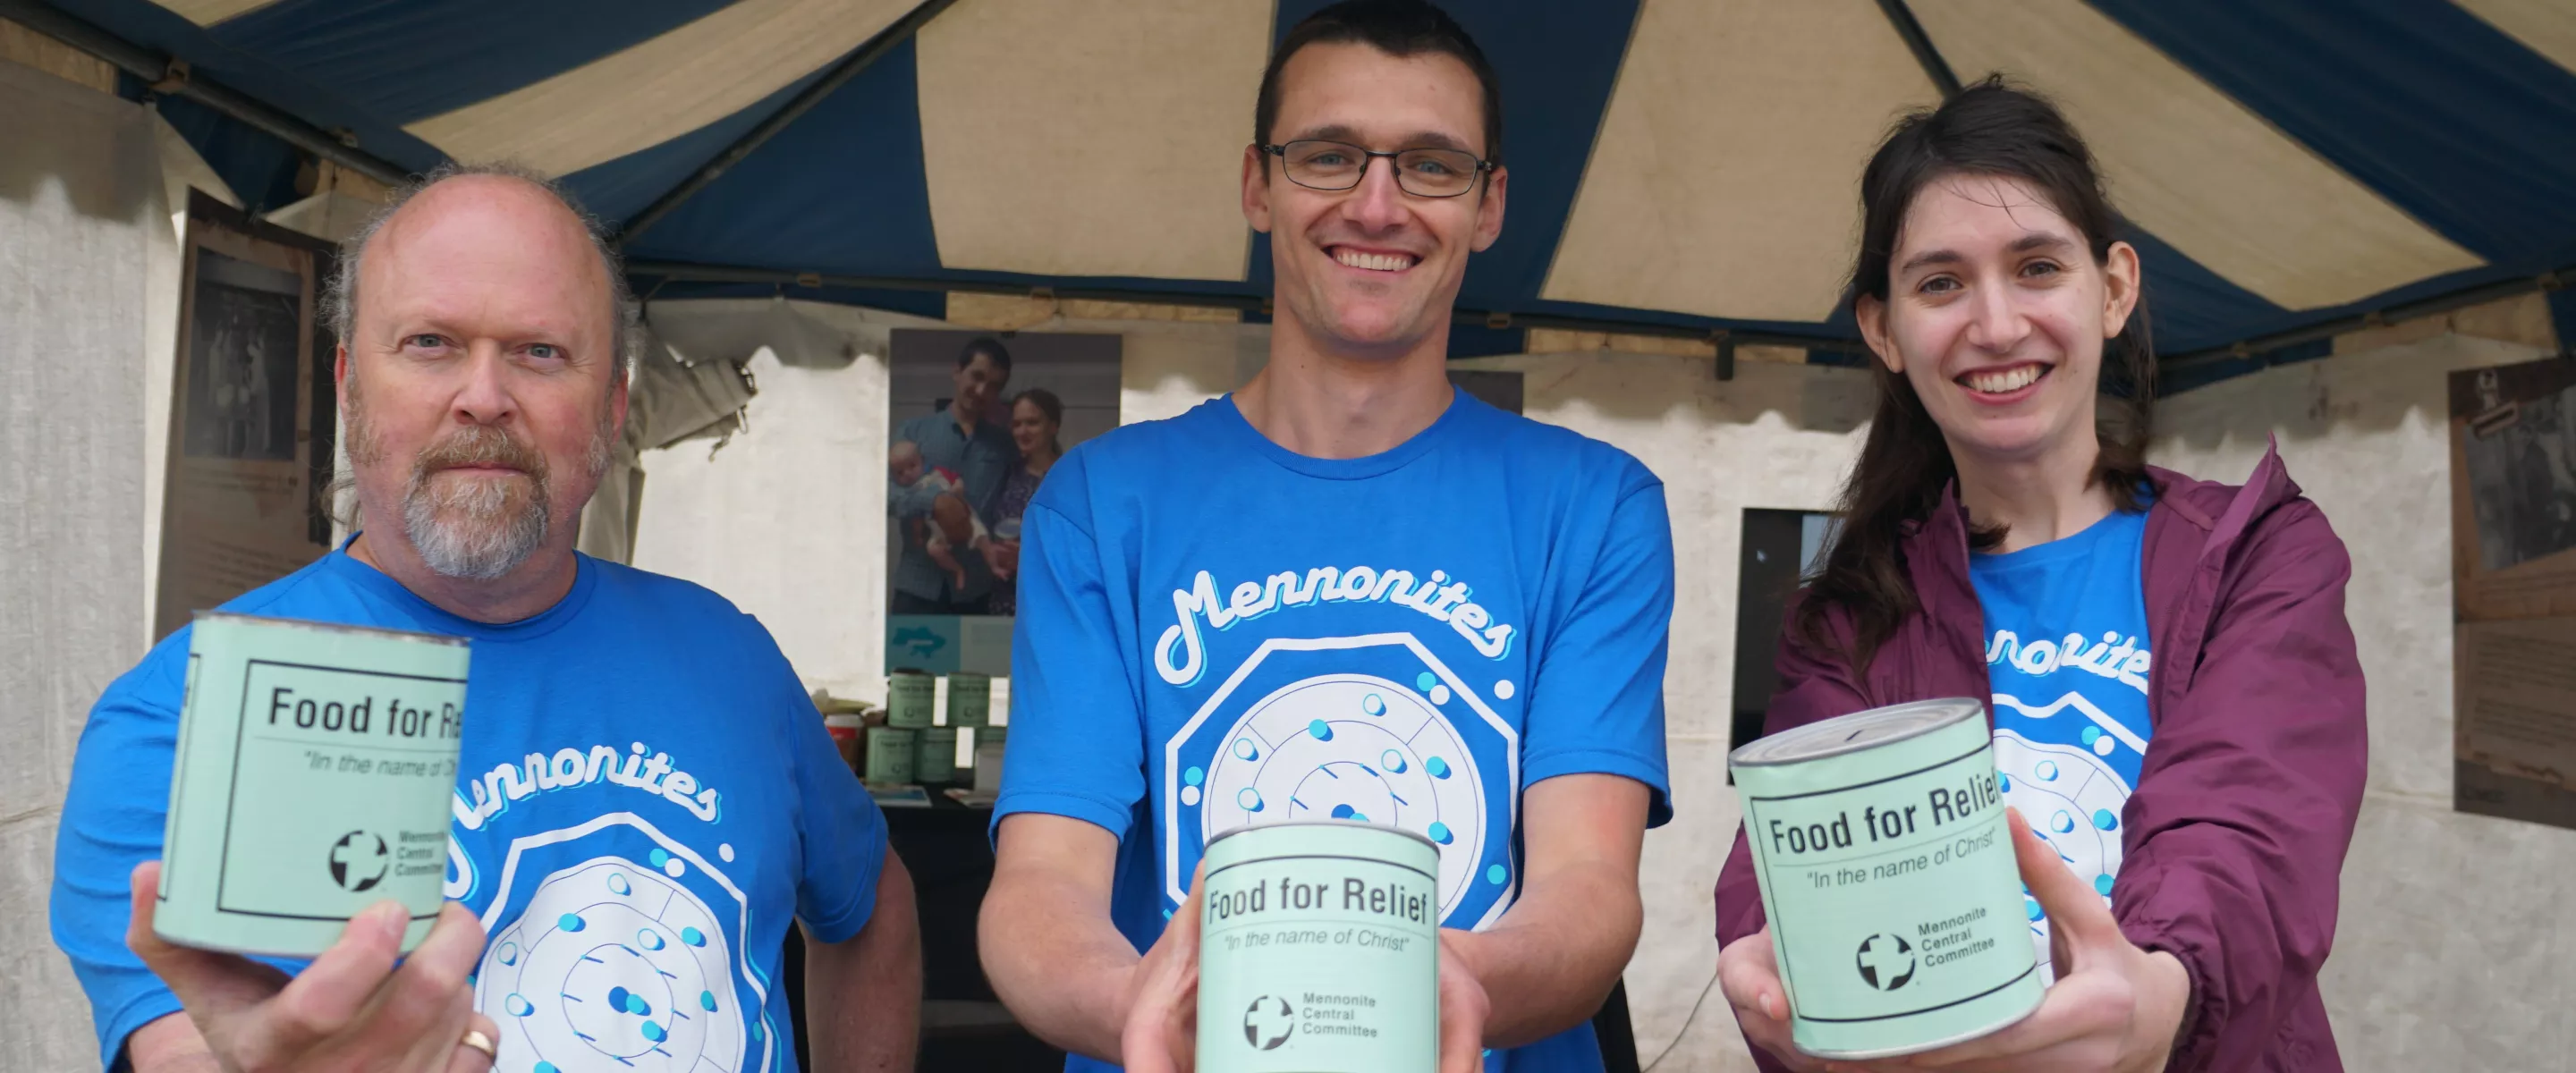 Standing outside a tent, three people wearing identical blue shirts each hold out a can that reads "Food for Relief" to the camera.